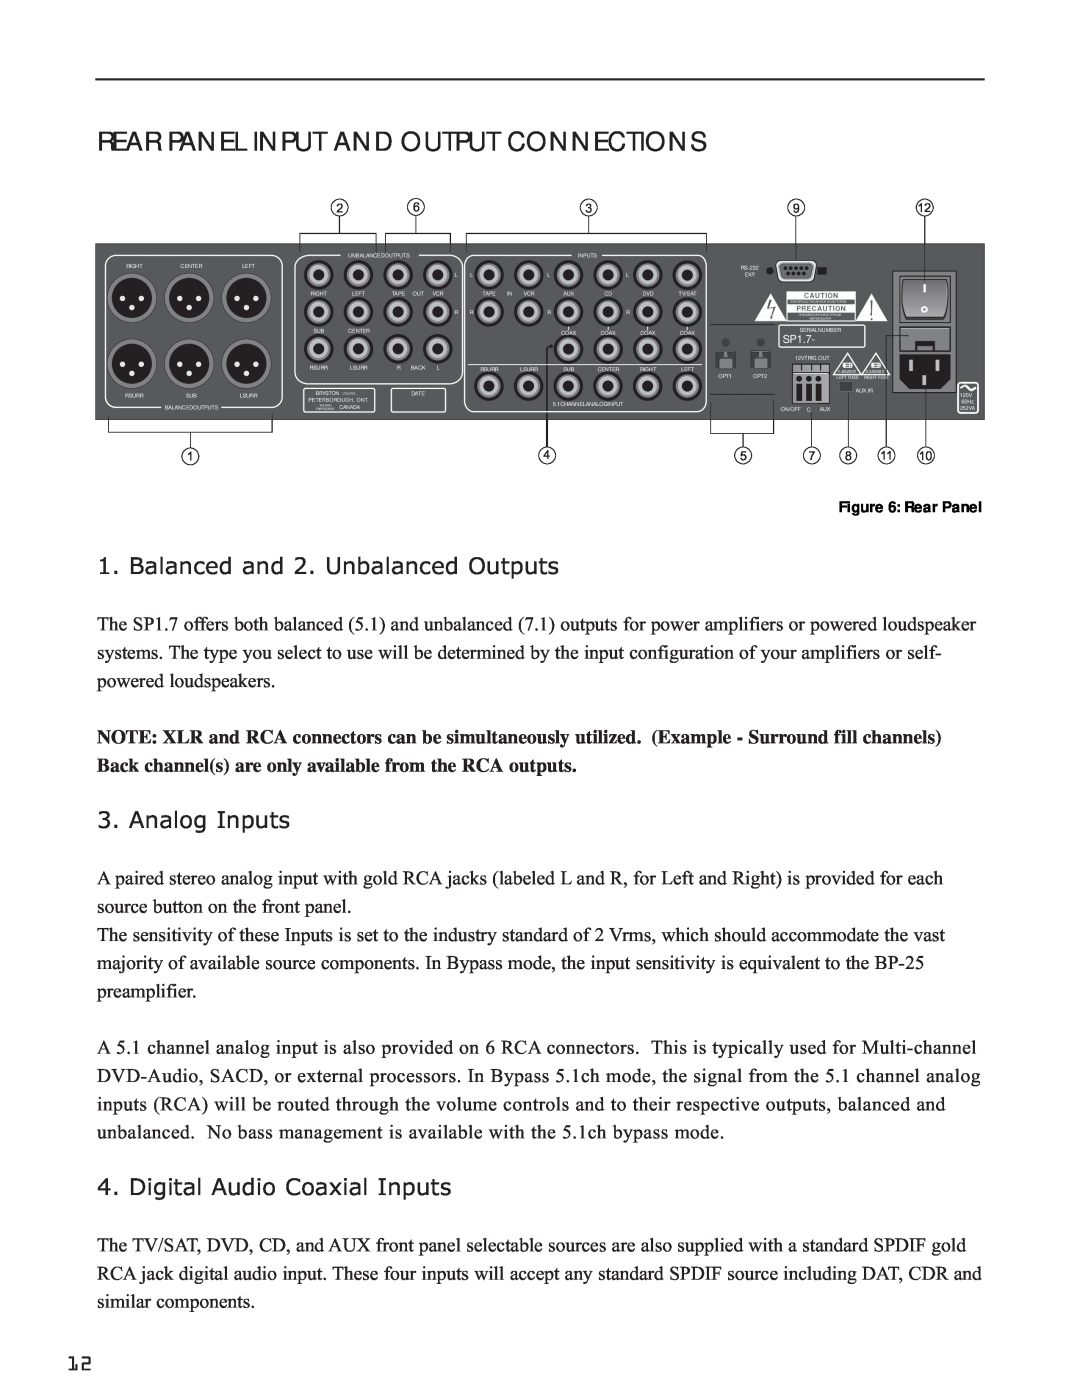 Bryston SP1.7PRECISION manual Rear Panel Input And Output Connections, Balanced and 2. Unbalanced Outputs, Analog Inputs 